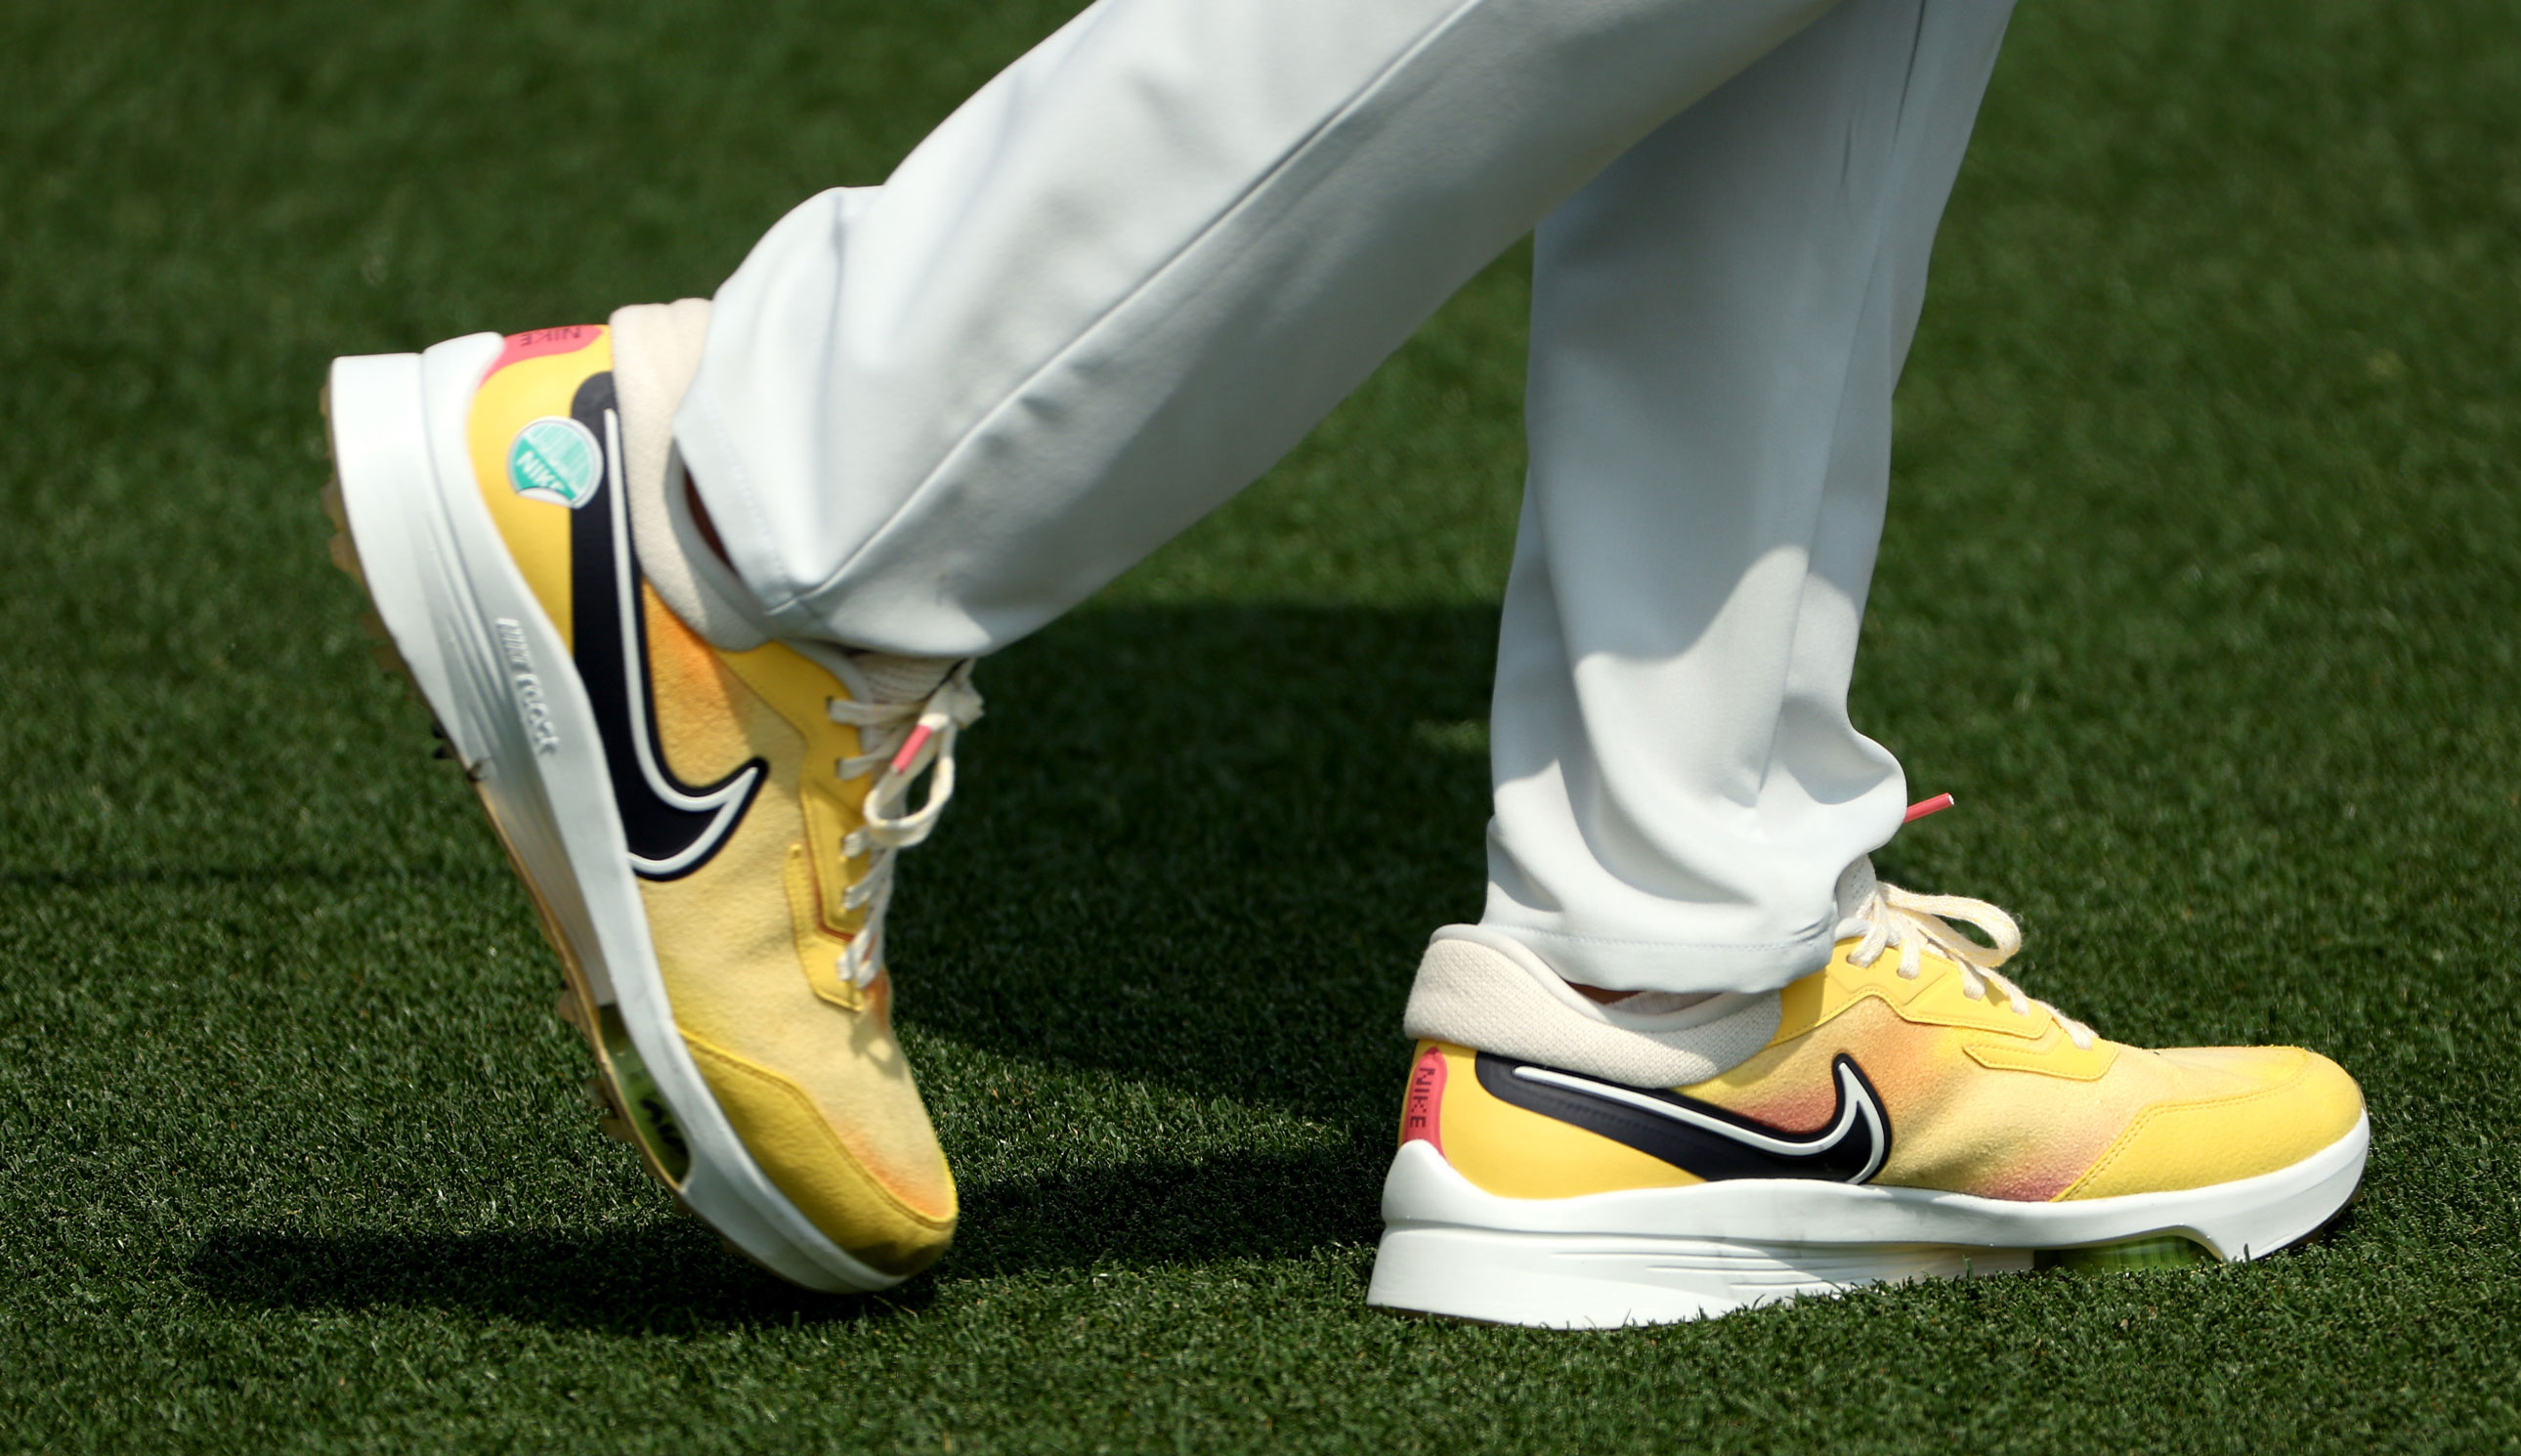 Brooks Koepka shoes at The Masters